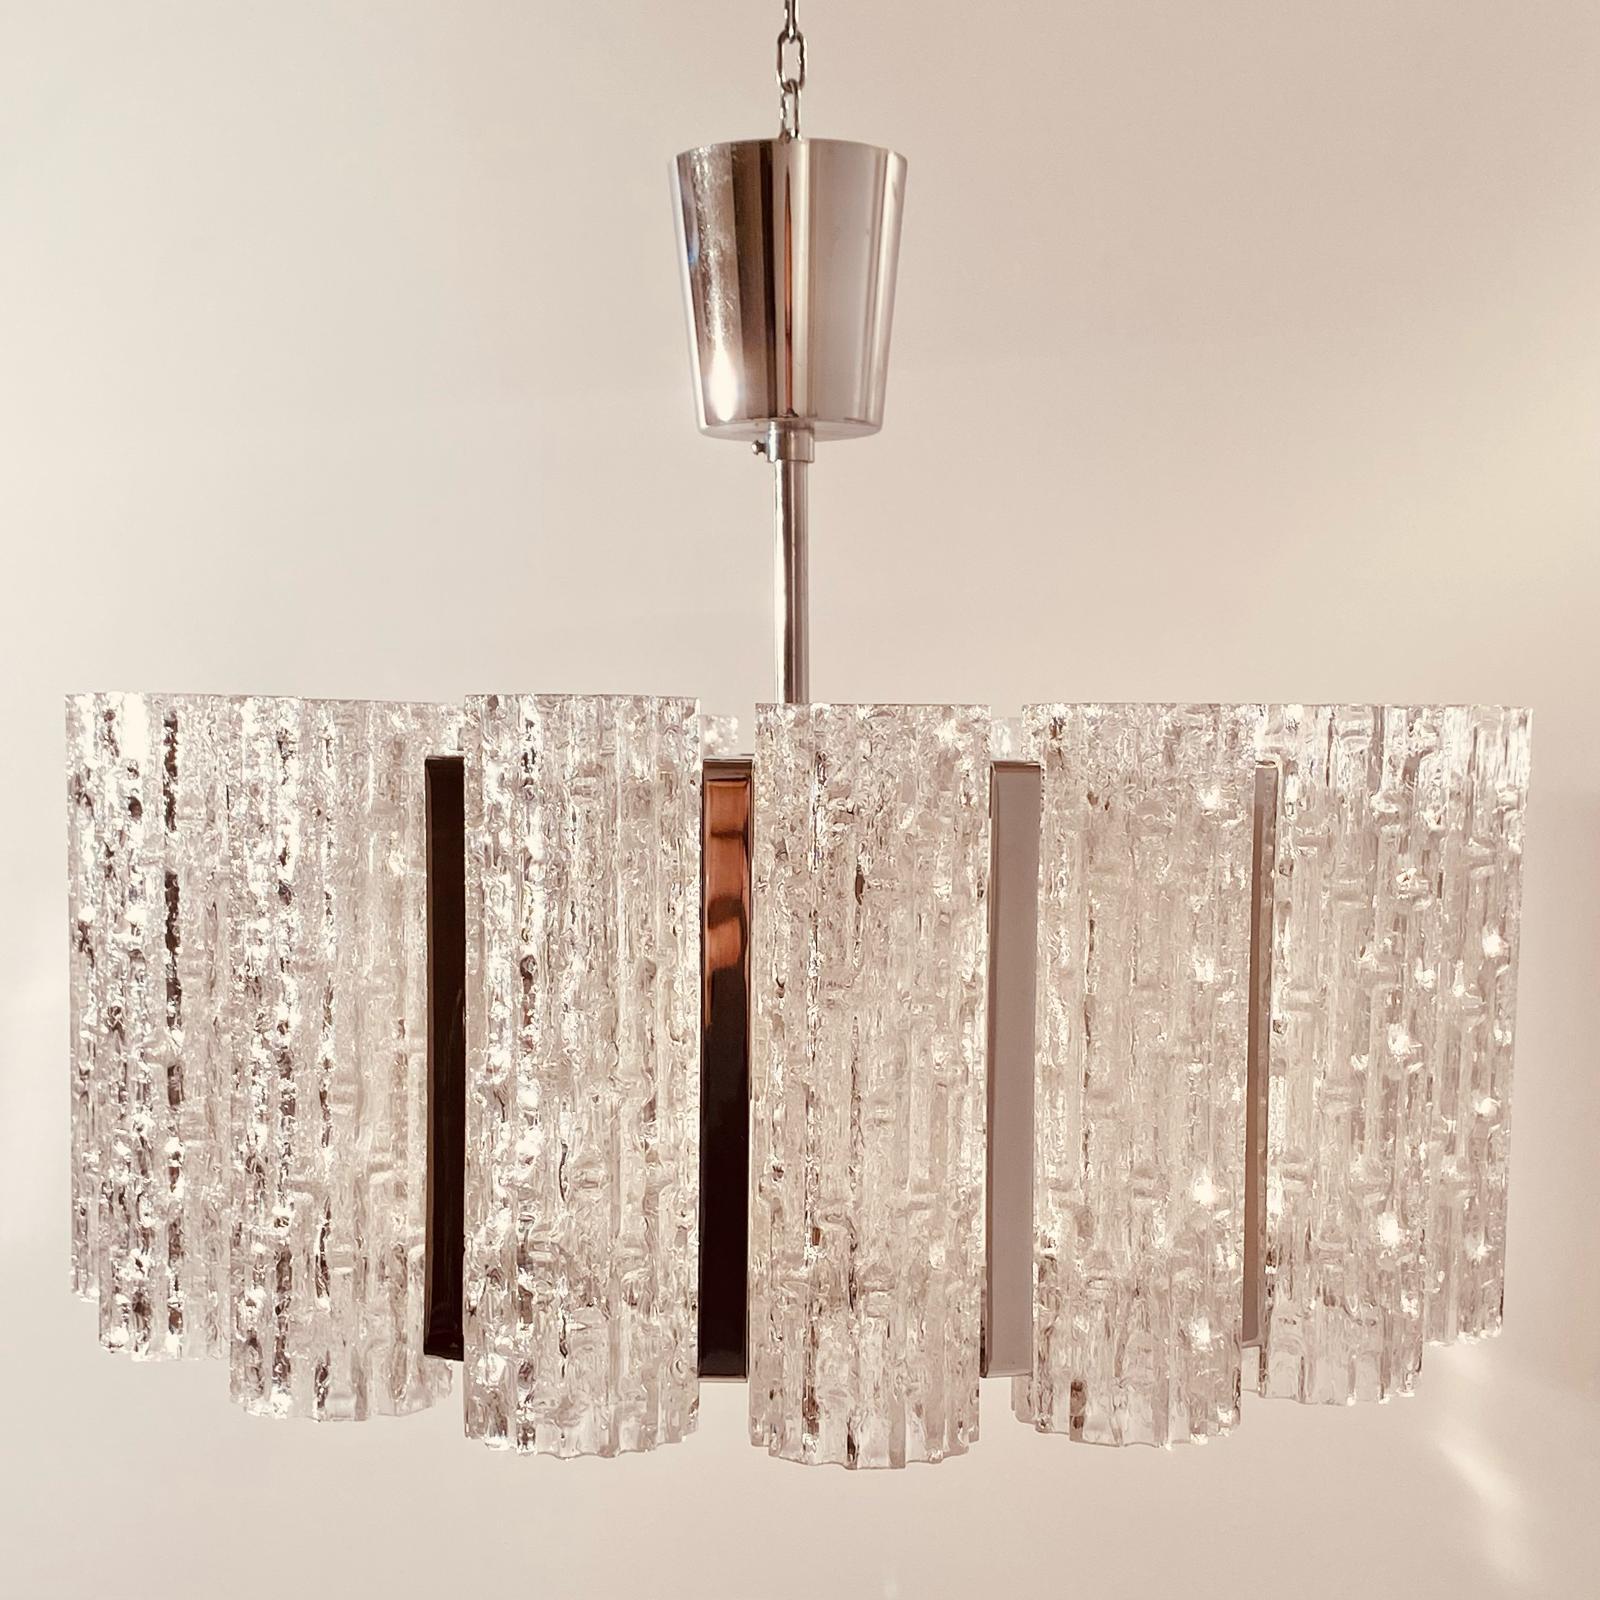 Murano chandelier,  Barovier e Toso, Italy, 1960s For Sale 2